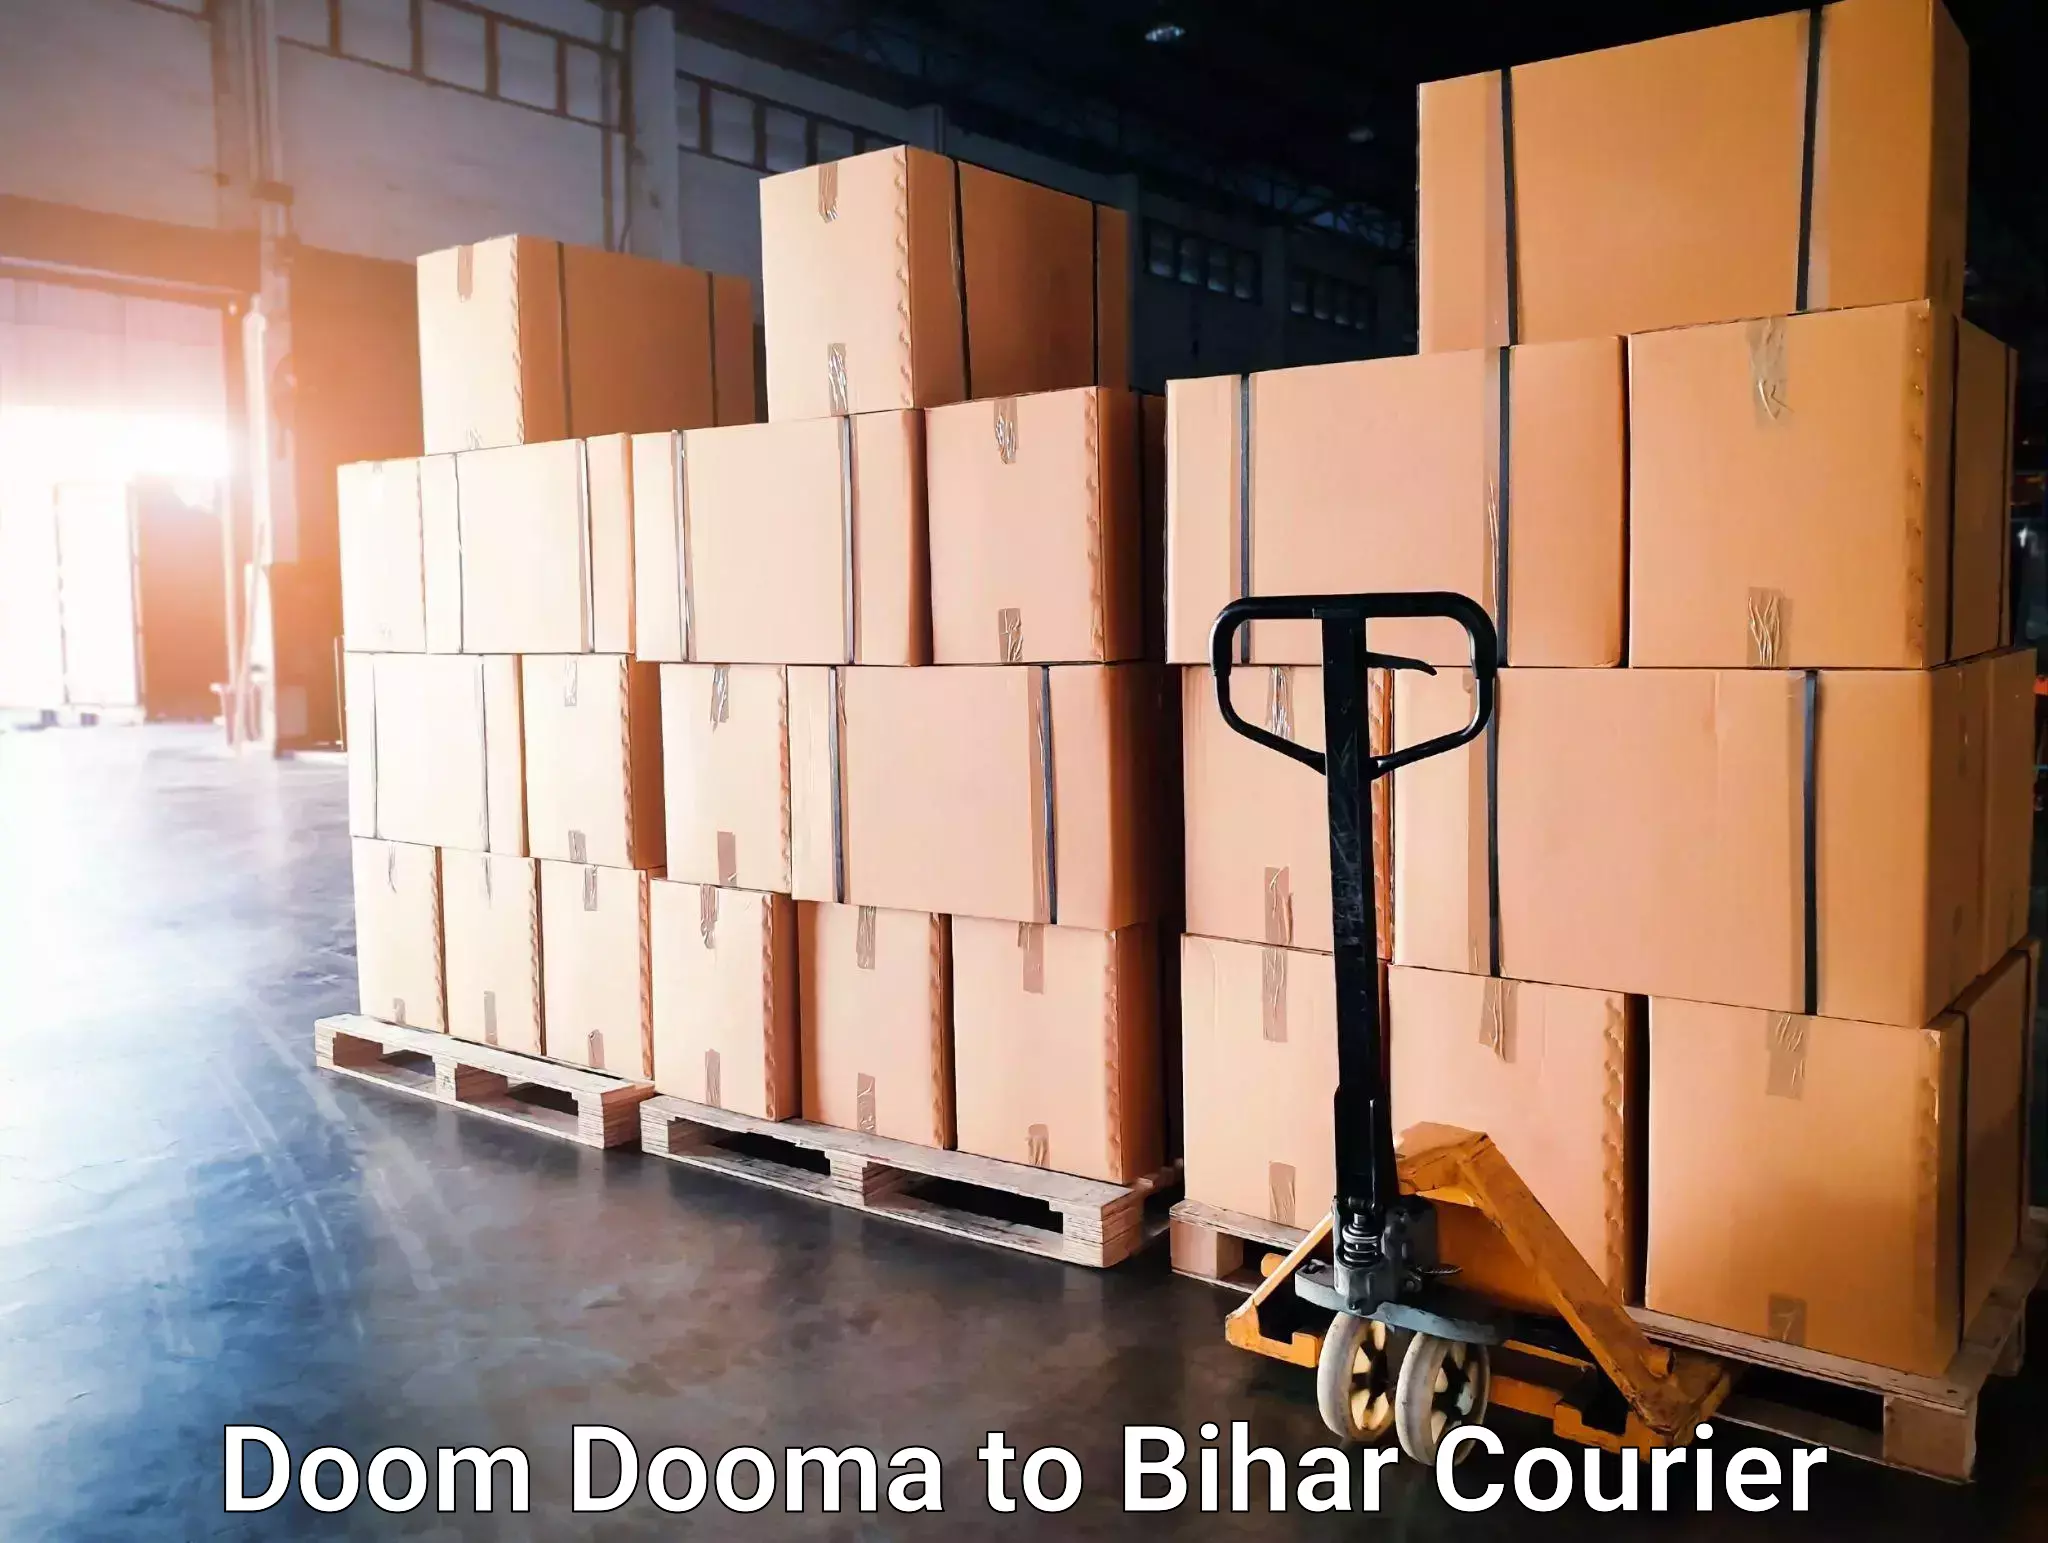 Multi-city courier Doom Dooma to Fatwah